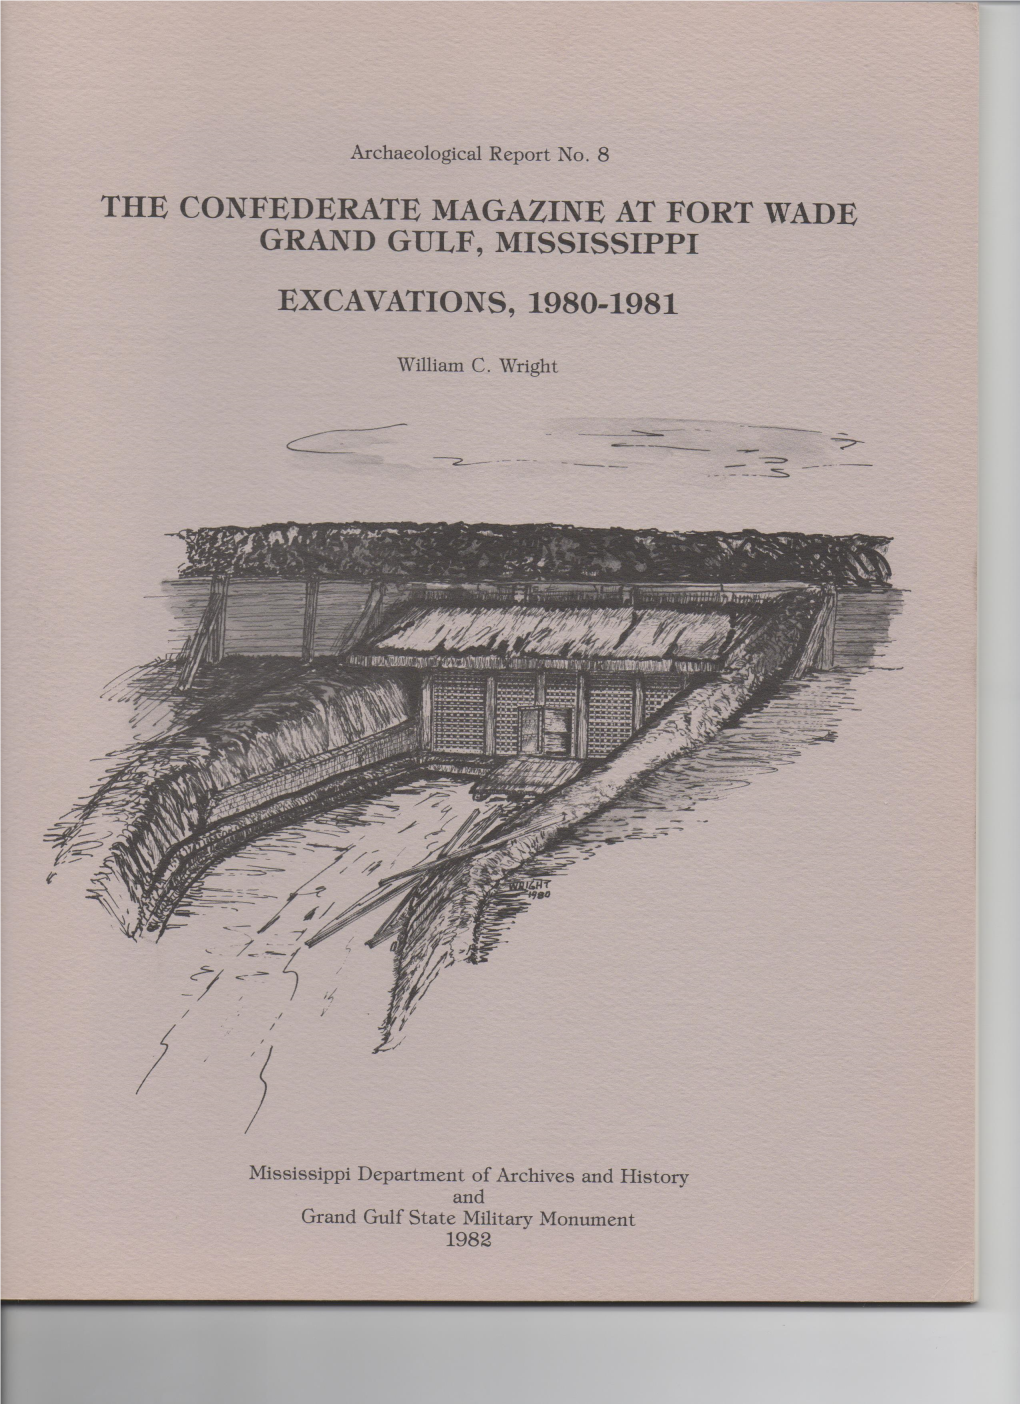 The Confederate Magazine at Fort Wade Grand Gulf